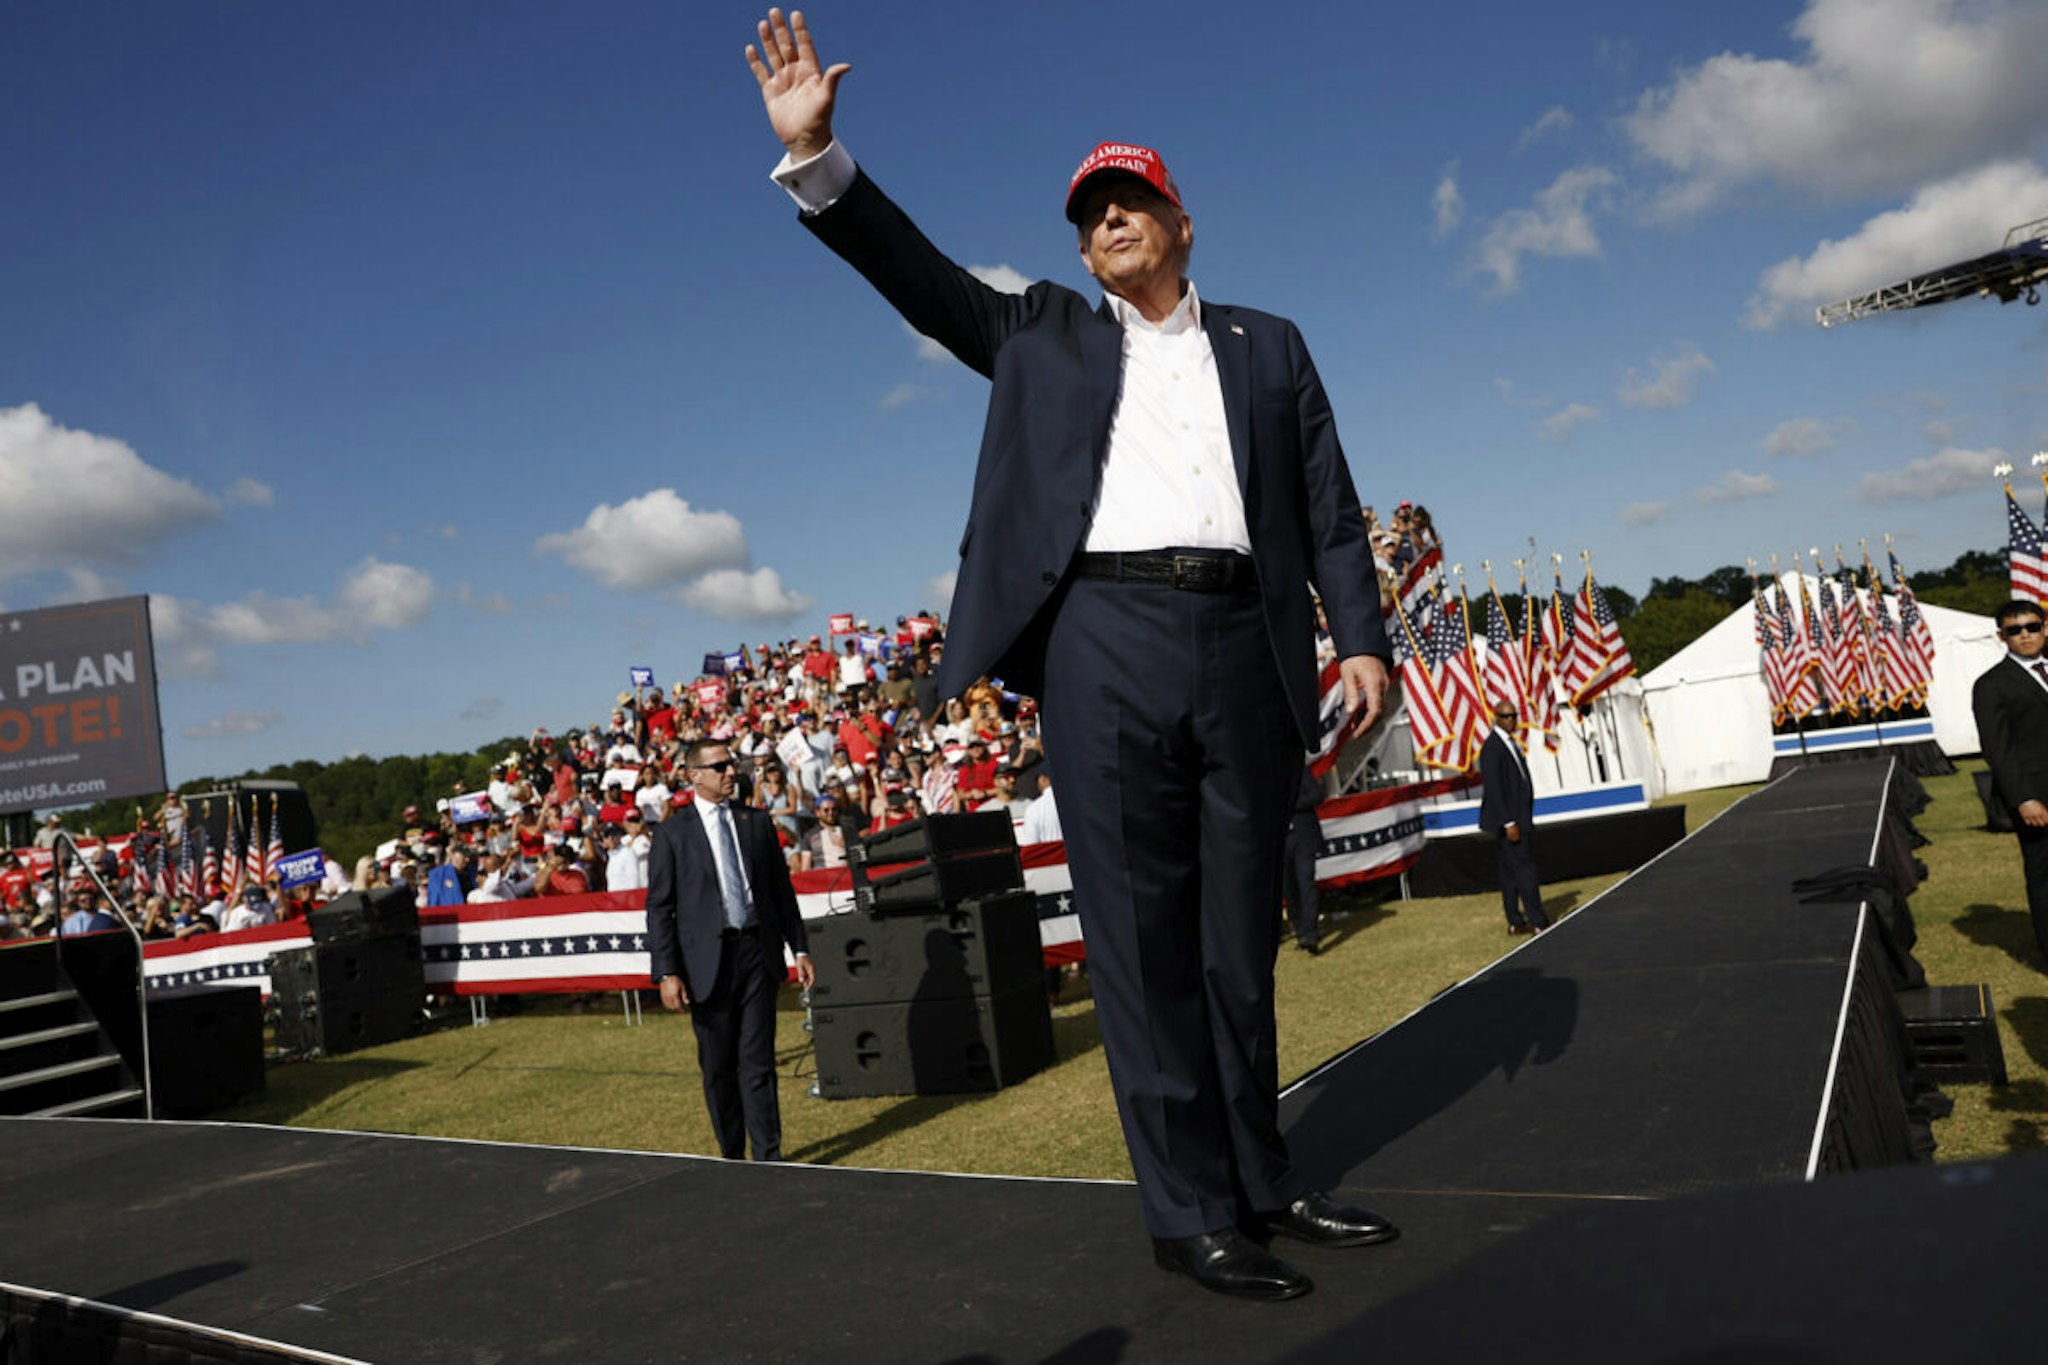 CHESAPEAKE, VIRGINIA - JUNE 28: Republican presidential candidate, former U.S. President Donald Trump walks offstafe after giving remarks at a rally at Greenbrier Farms on June 28, 2024 in Chesapeake, Virginia. Last night Trump and U.S. President Joe Biden took part in the first presidential debate of the 2024 campaign.